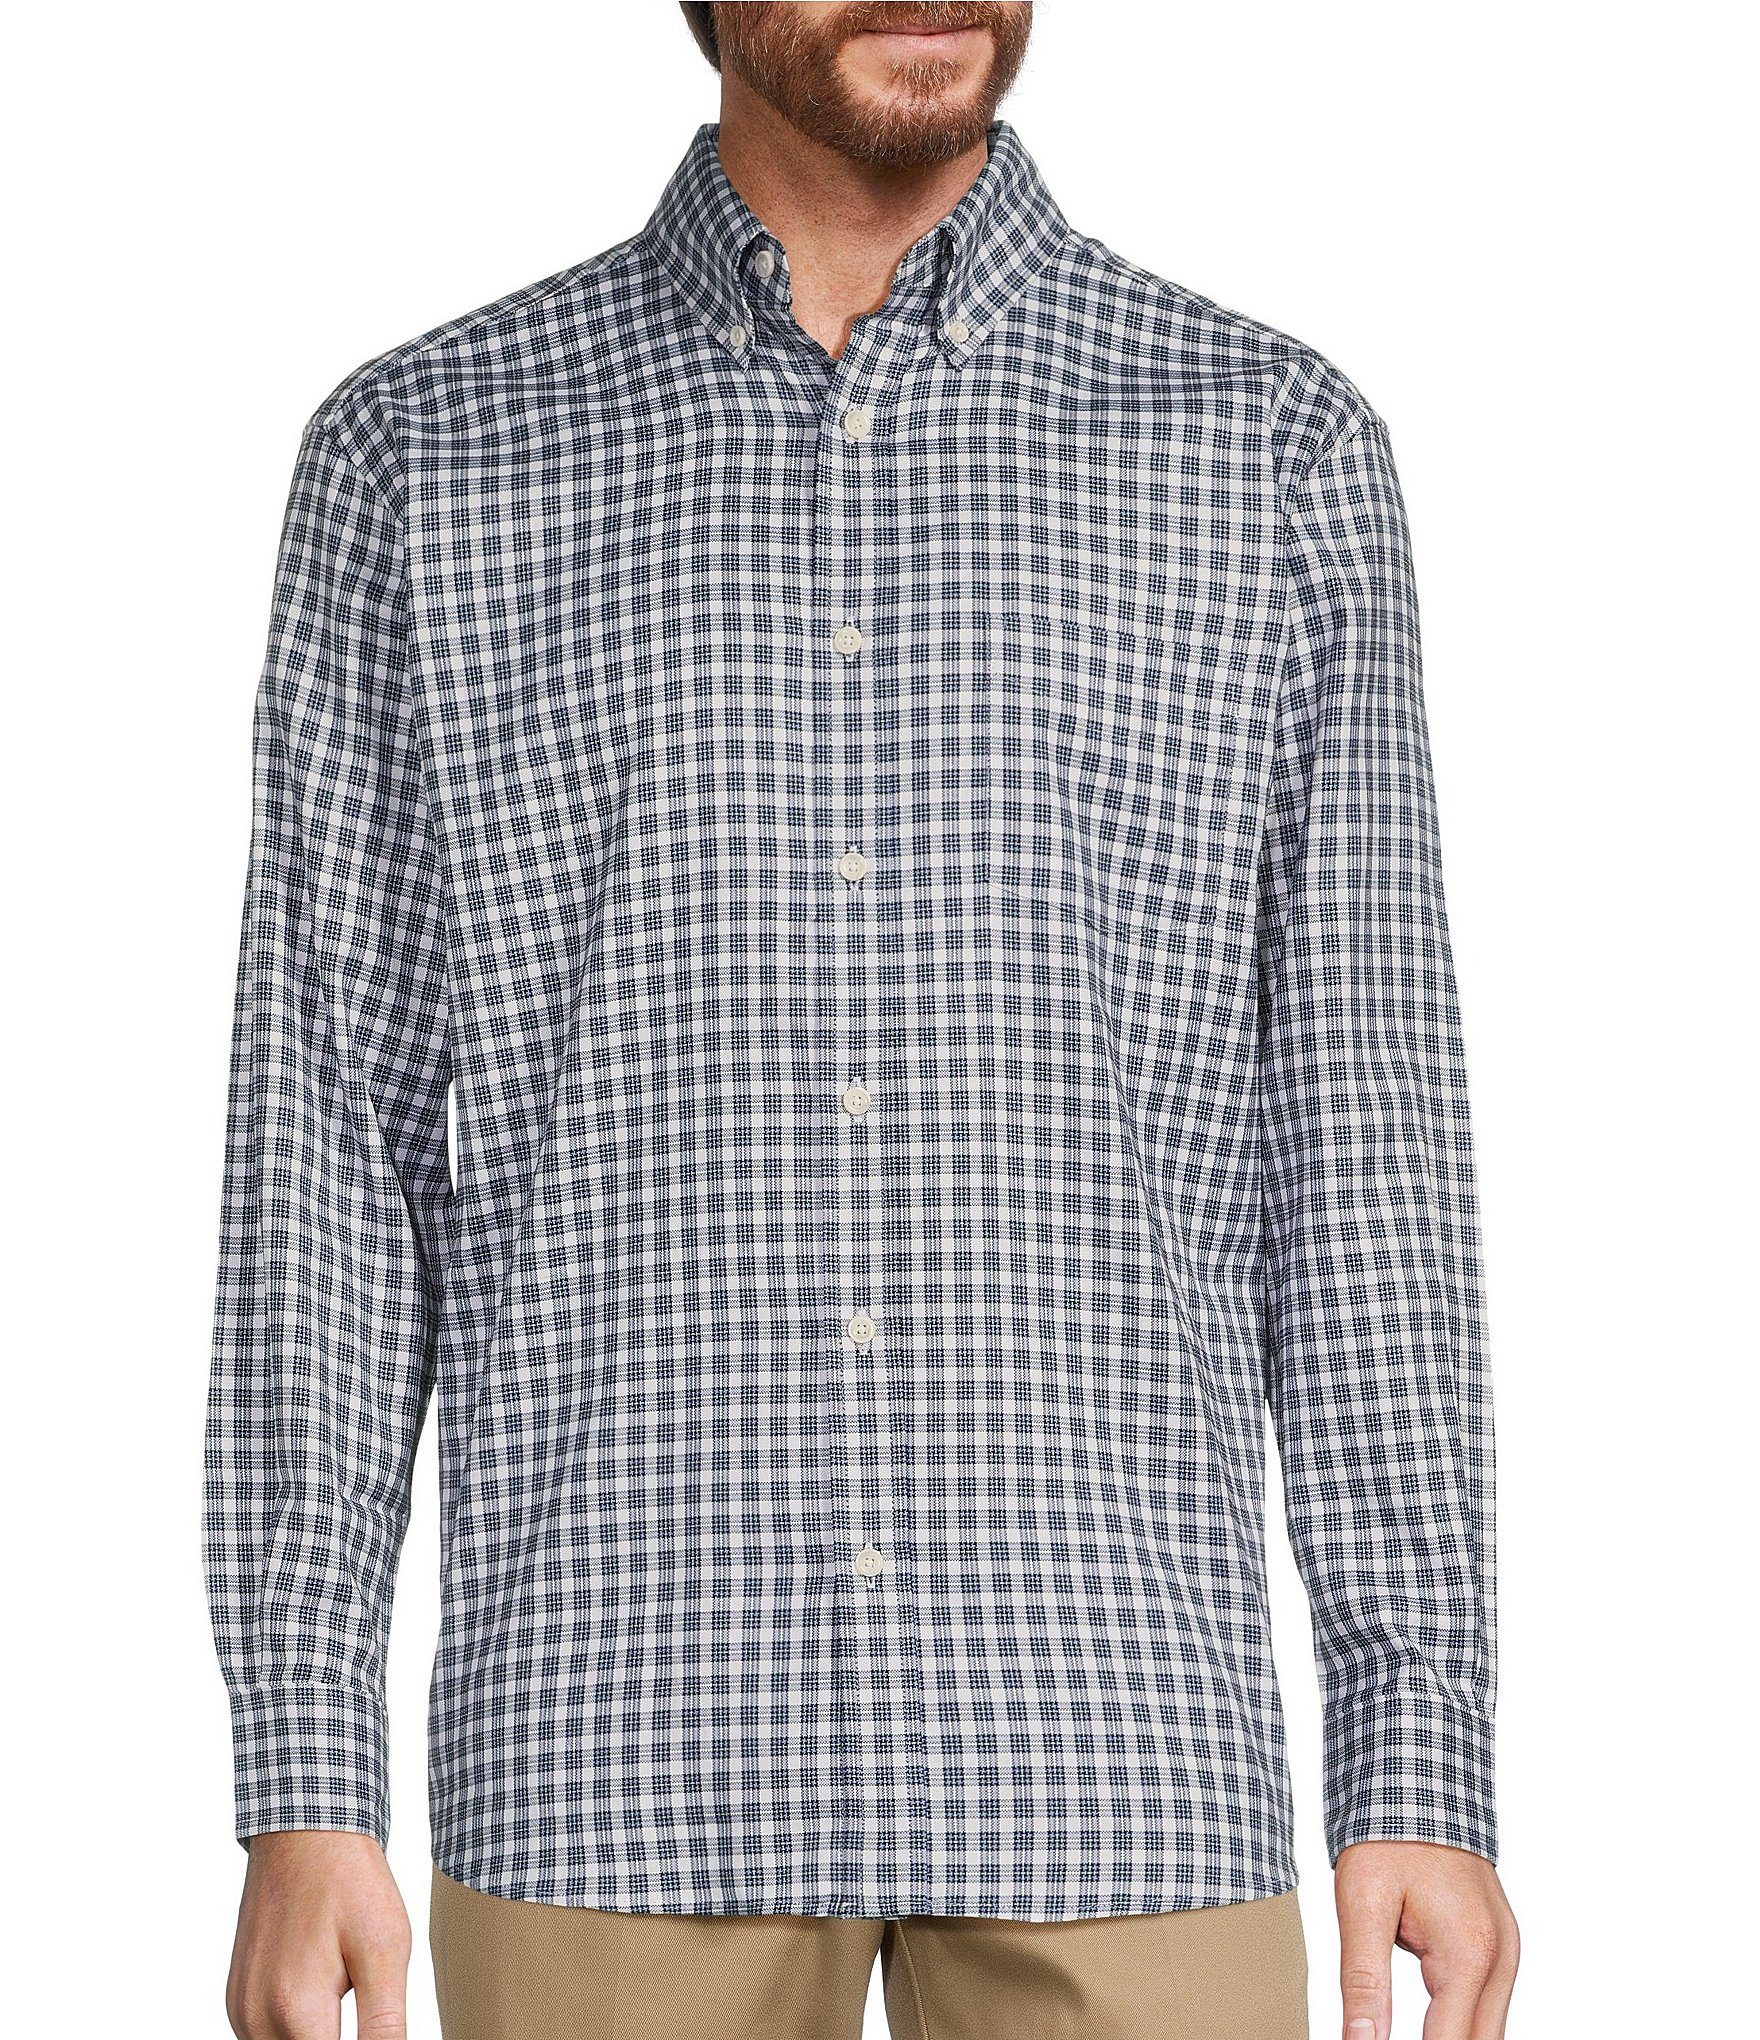 Men's Casual Button-Up Shirts